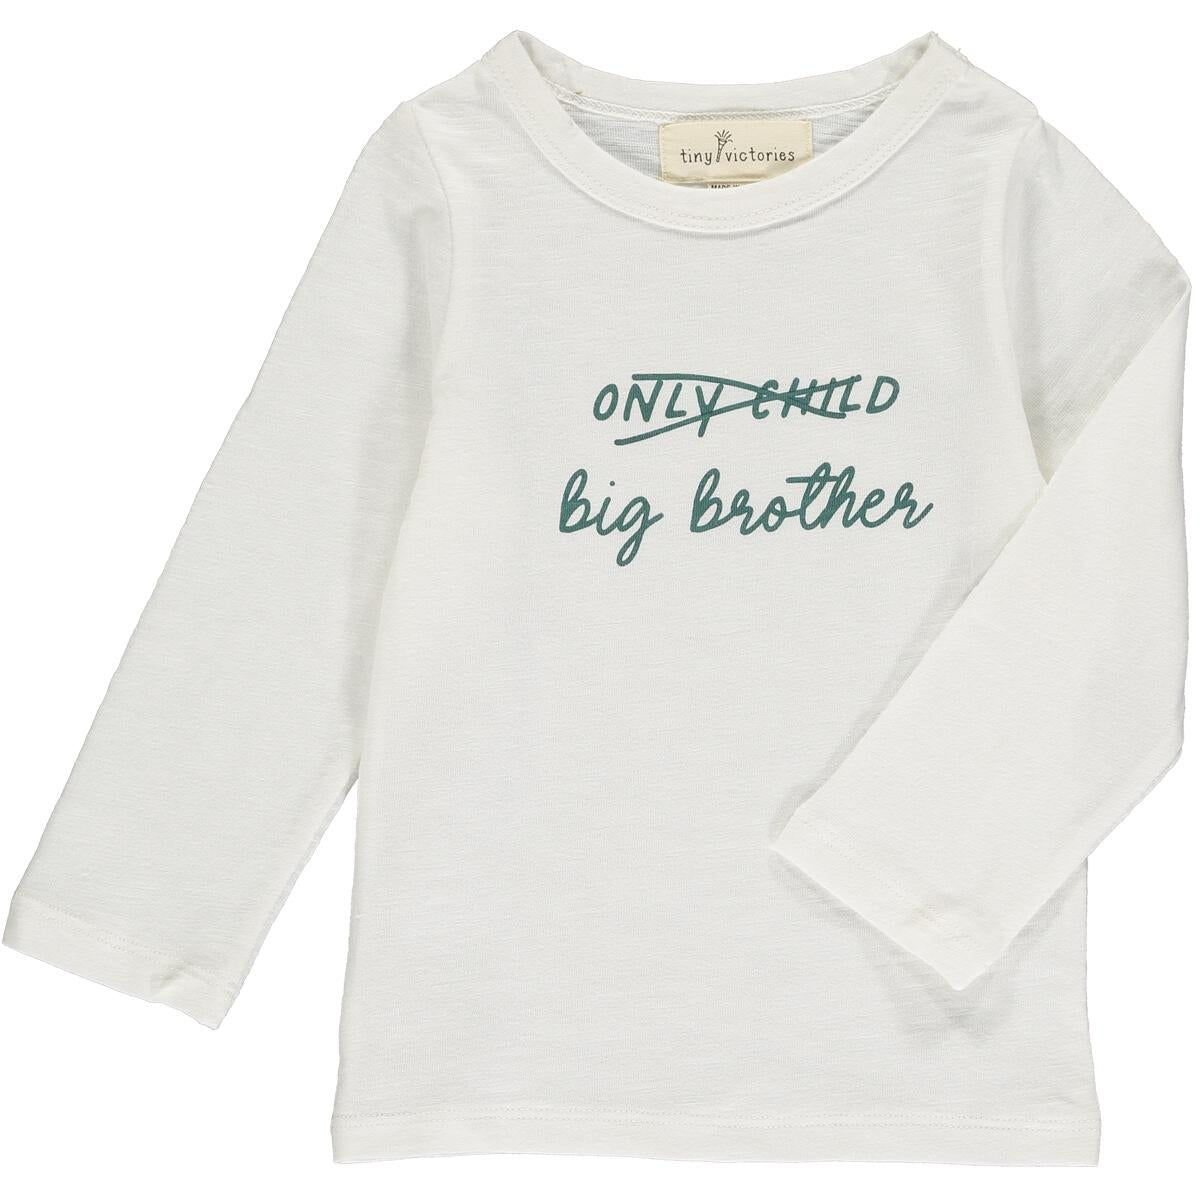 Only Child/Big Brother Shirt